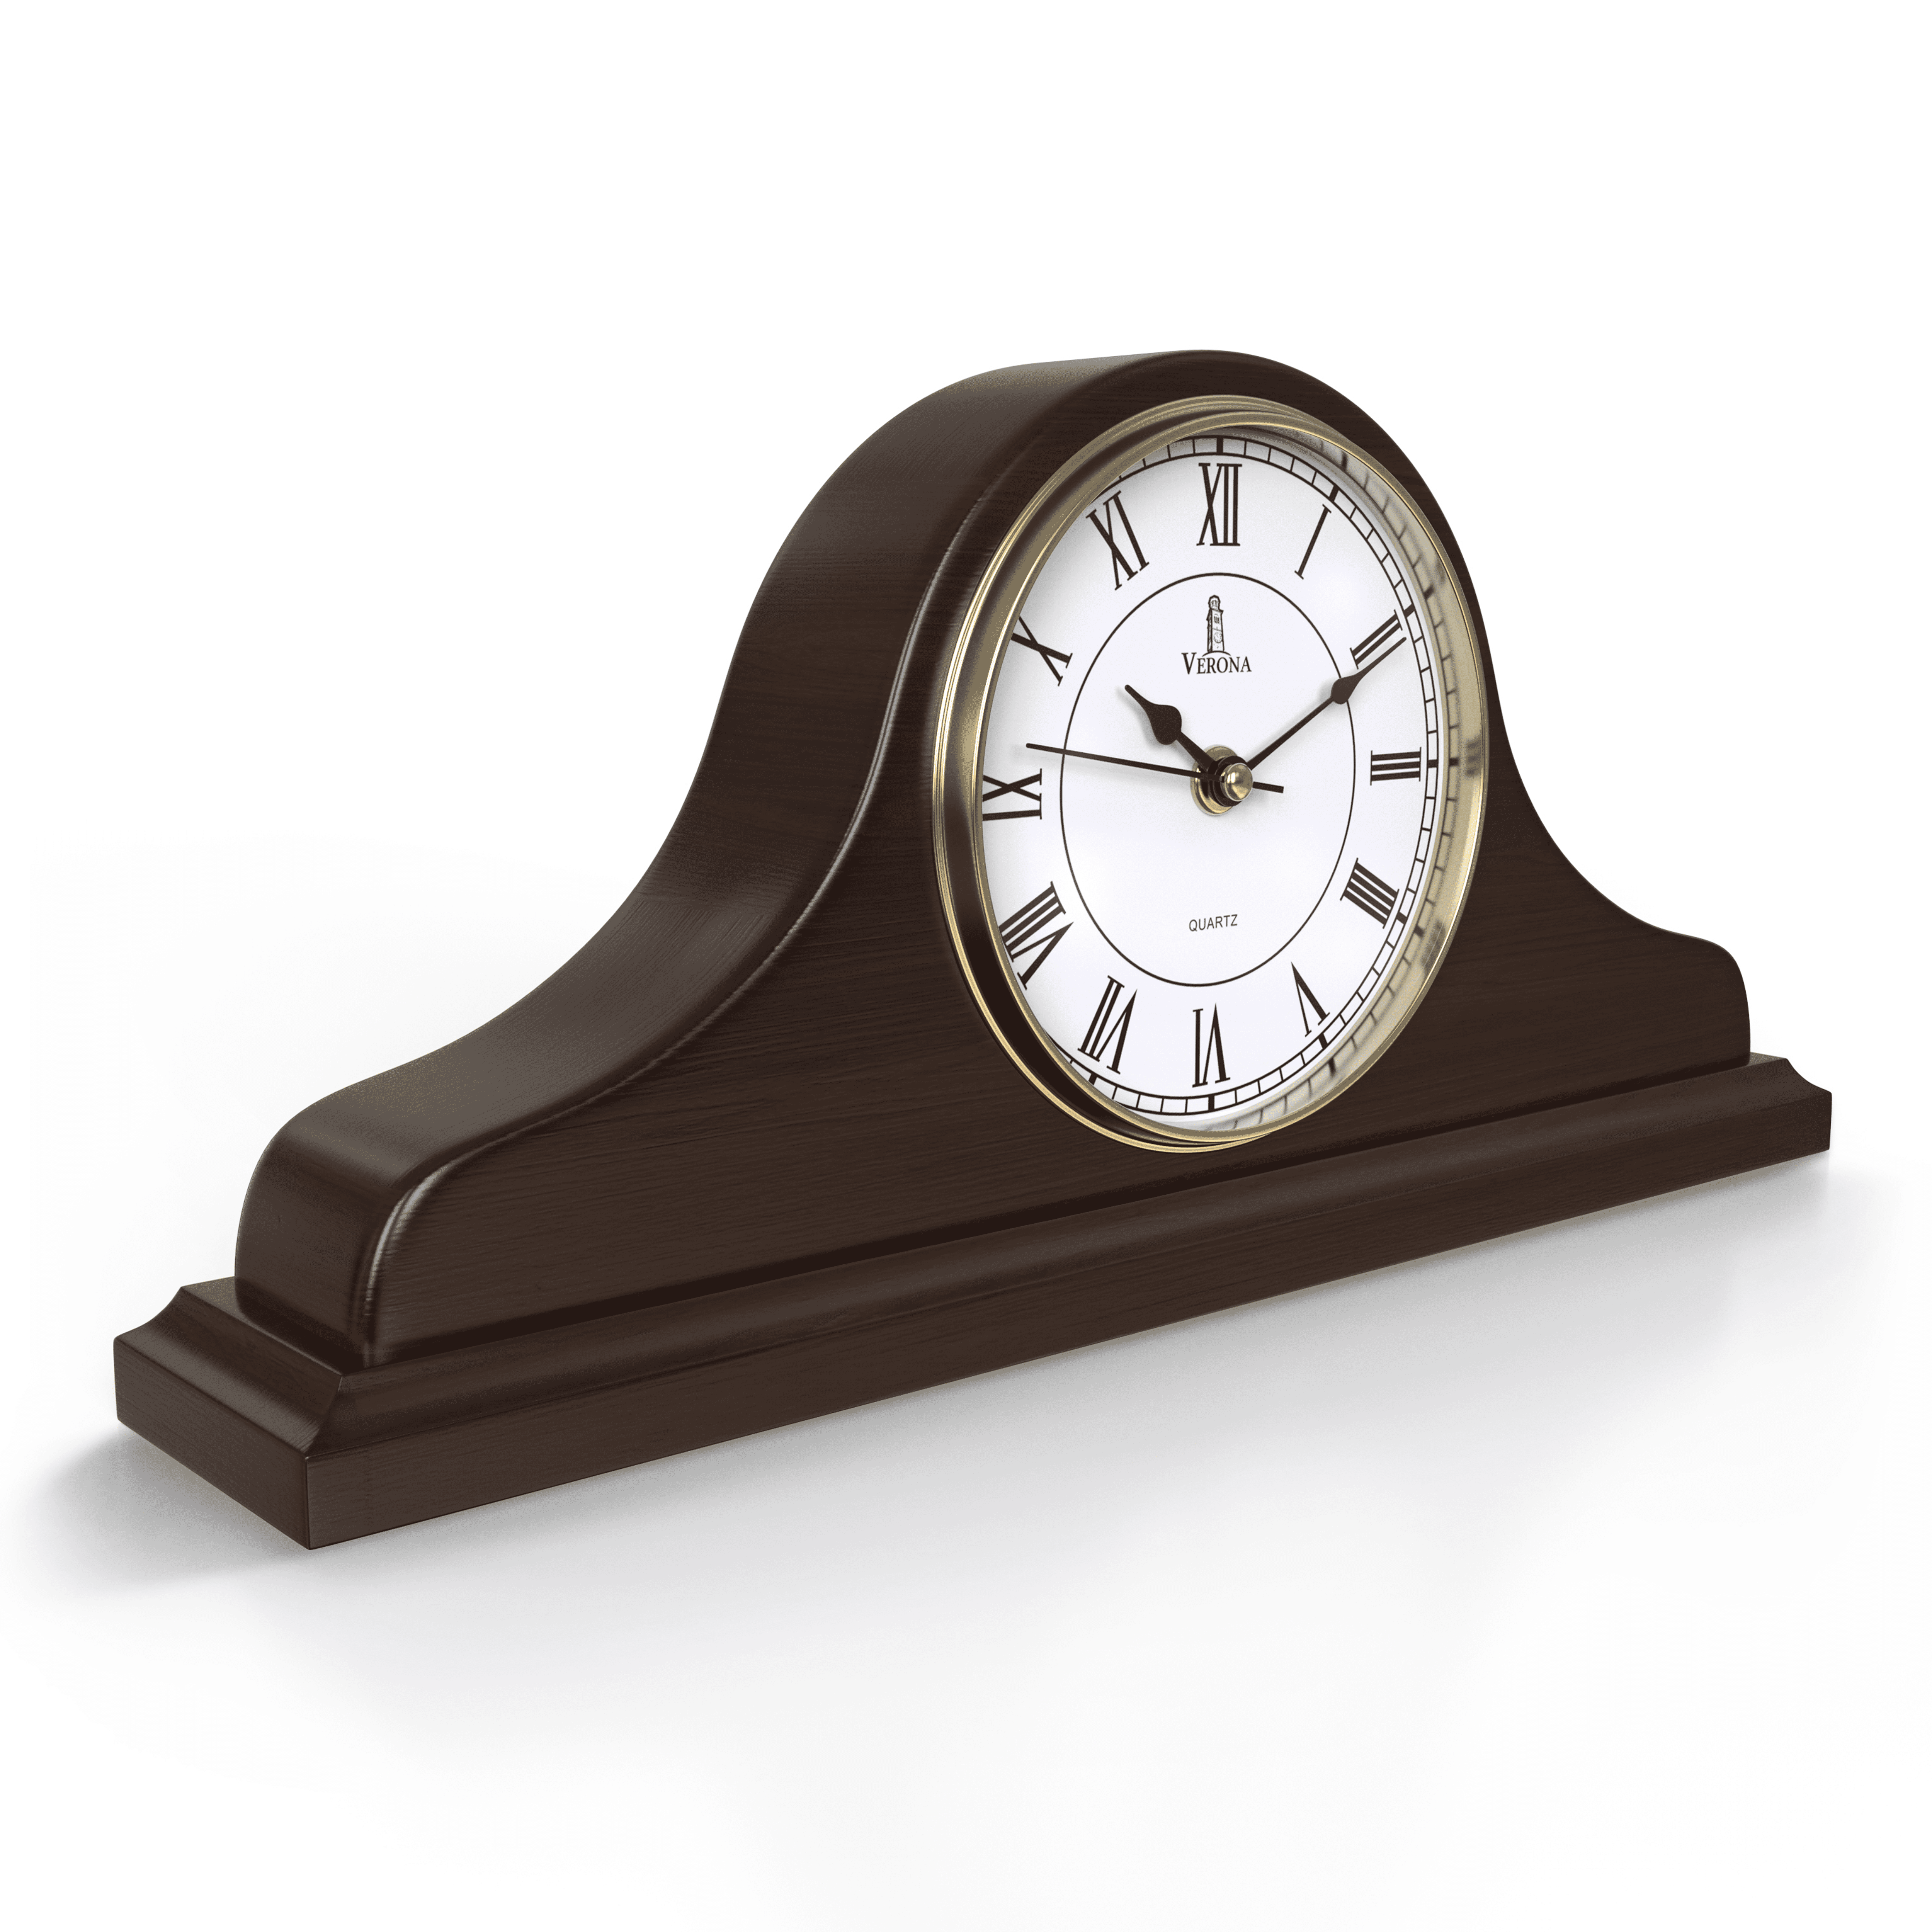 Office 9-Inch Square Mantel Clock Retro Style Fireplace Decoration Suitable for Living Room Roman Numerals Beesealy Table Clock